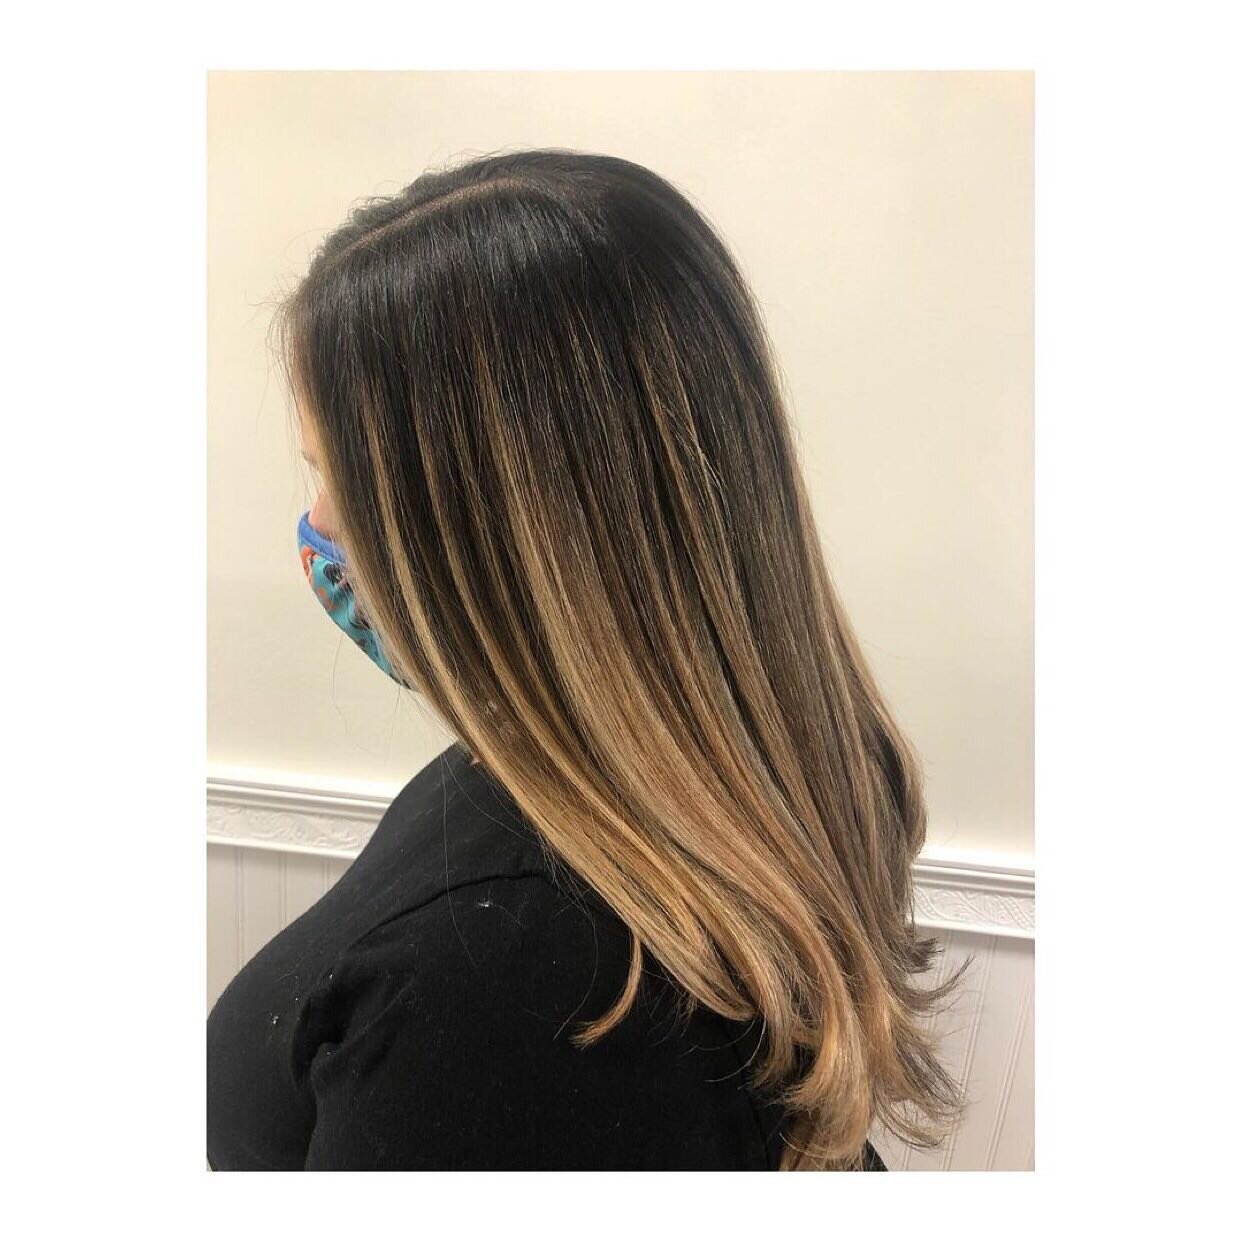 @hair_by_dreee 
Sugar cookie 🍪 ➡️ Take a look at the hair after the balayage but before the smudge root &amp; glaze 🙌🏻 #hairbydreee